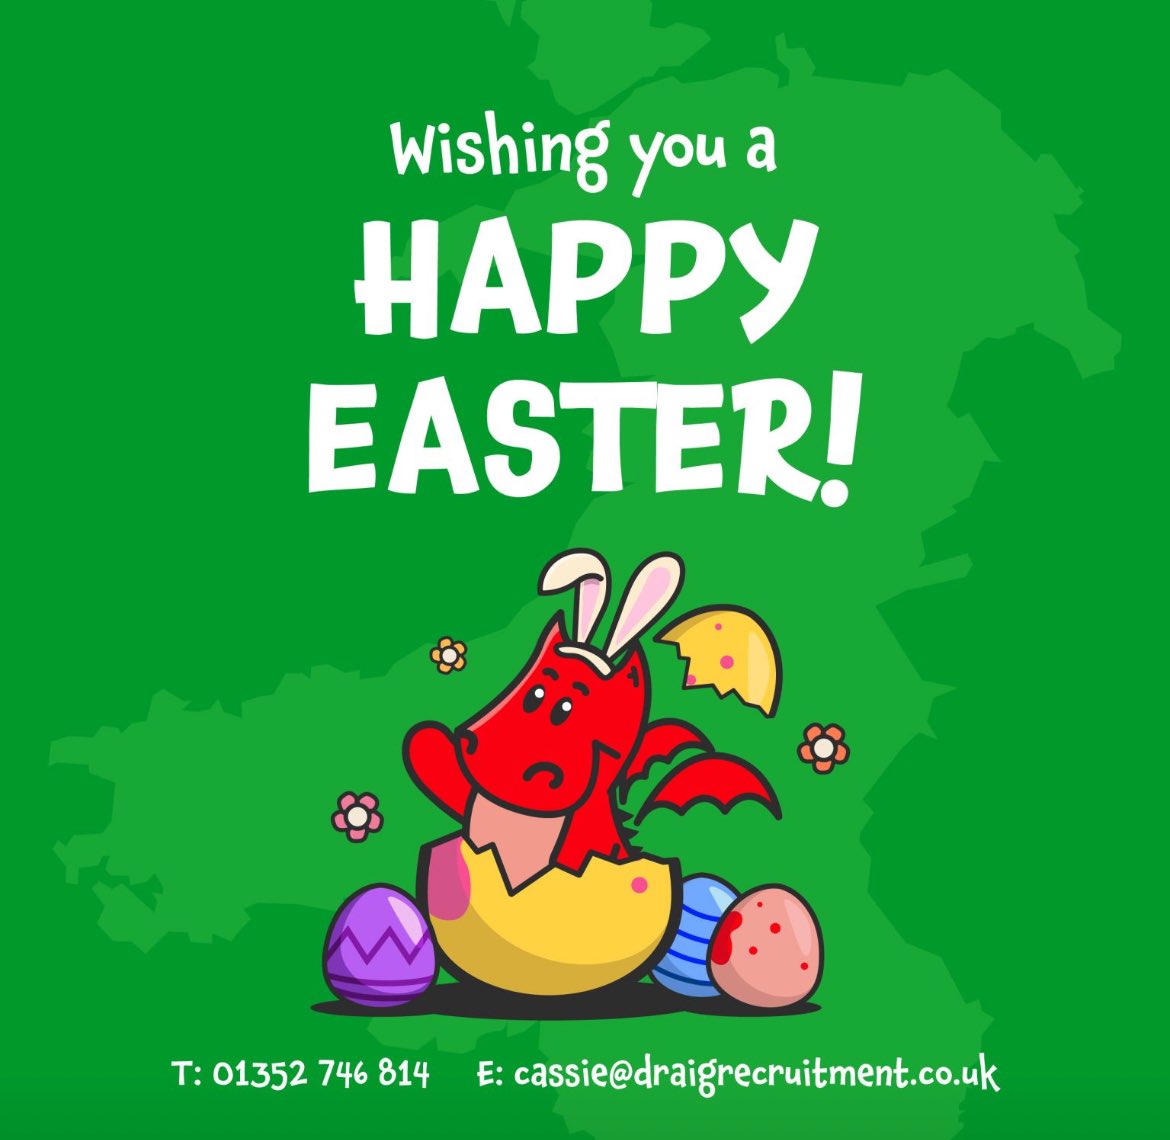 Are you a school looking for staff for after Easter or a candidate looking for work?
We are open during the Easter break, please contact us if you have any requirements. 
☎ 01352 746 814
📩 cassie@draigrecruitment.co.uk
draigrecruitment.co.uk
#NorthWalesSocial #northwalesjobs